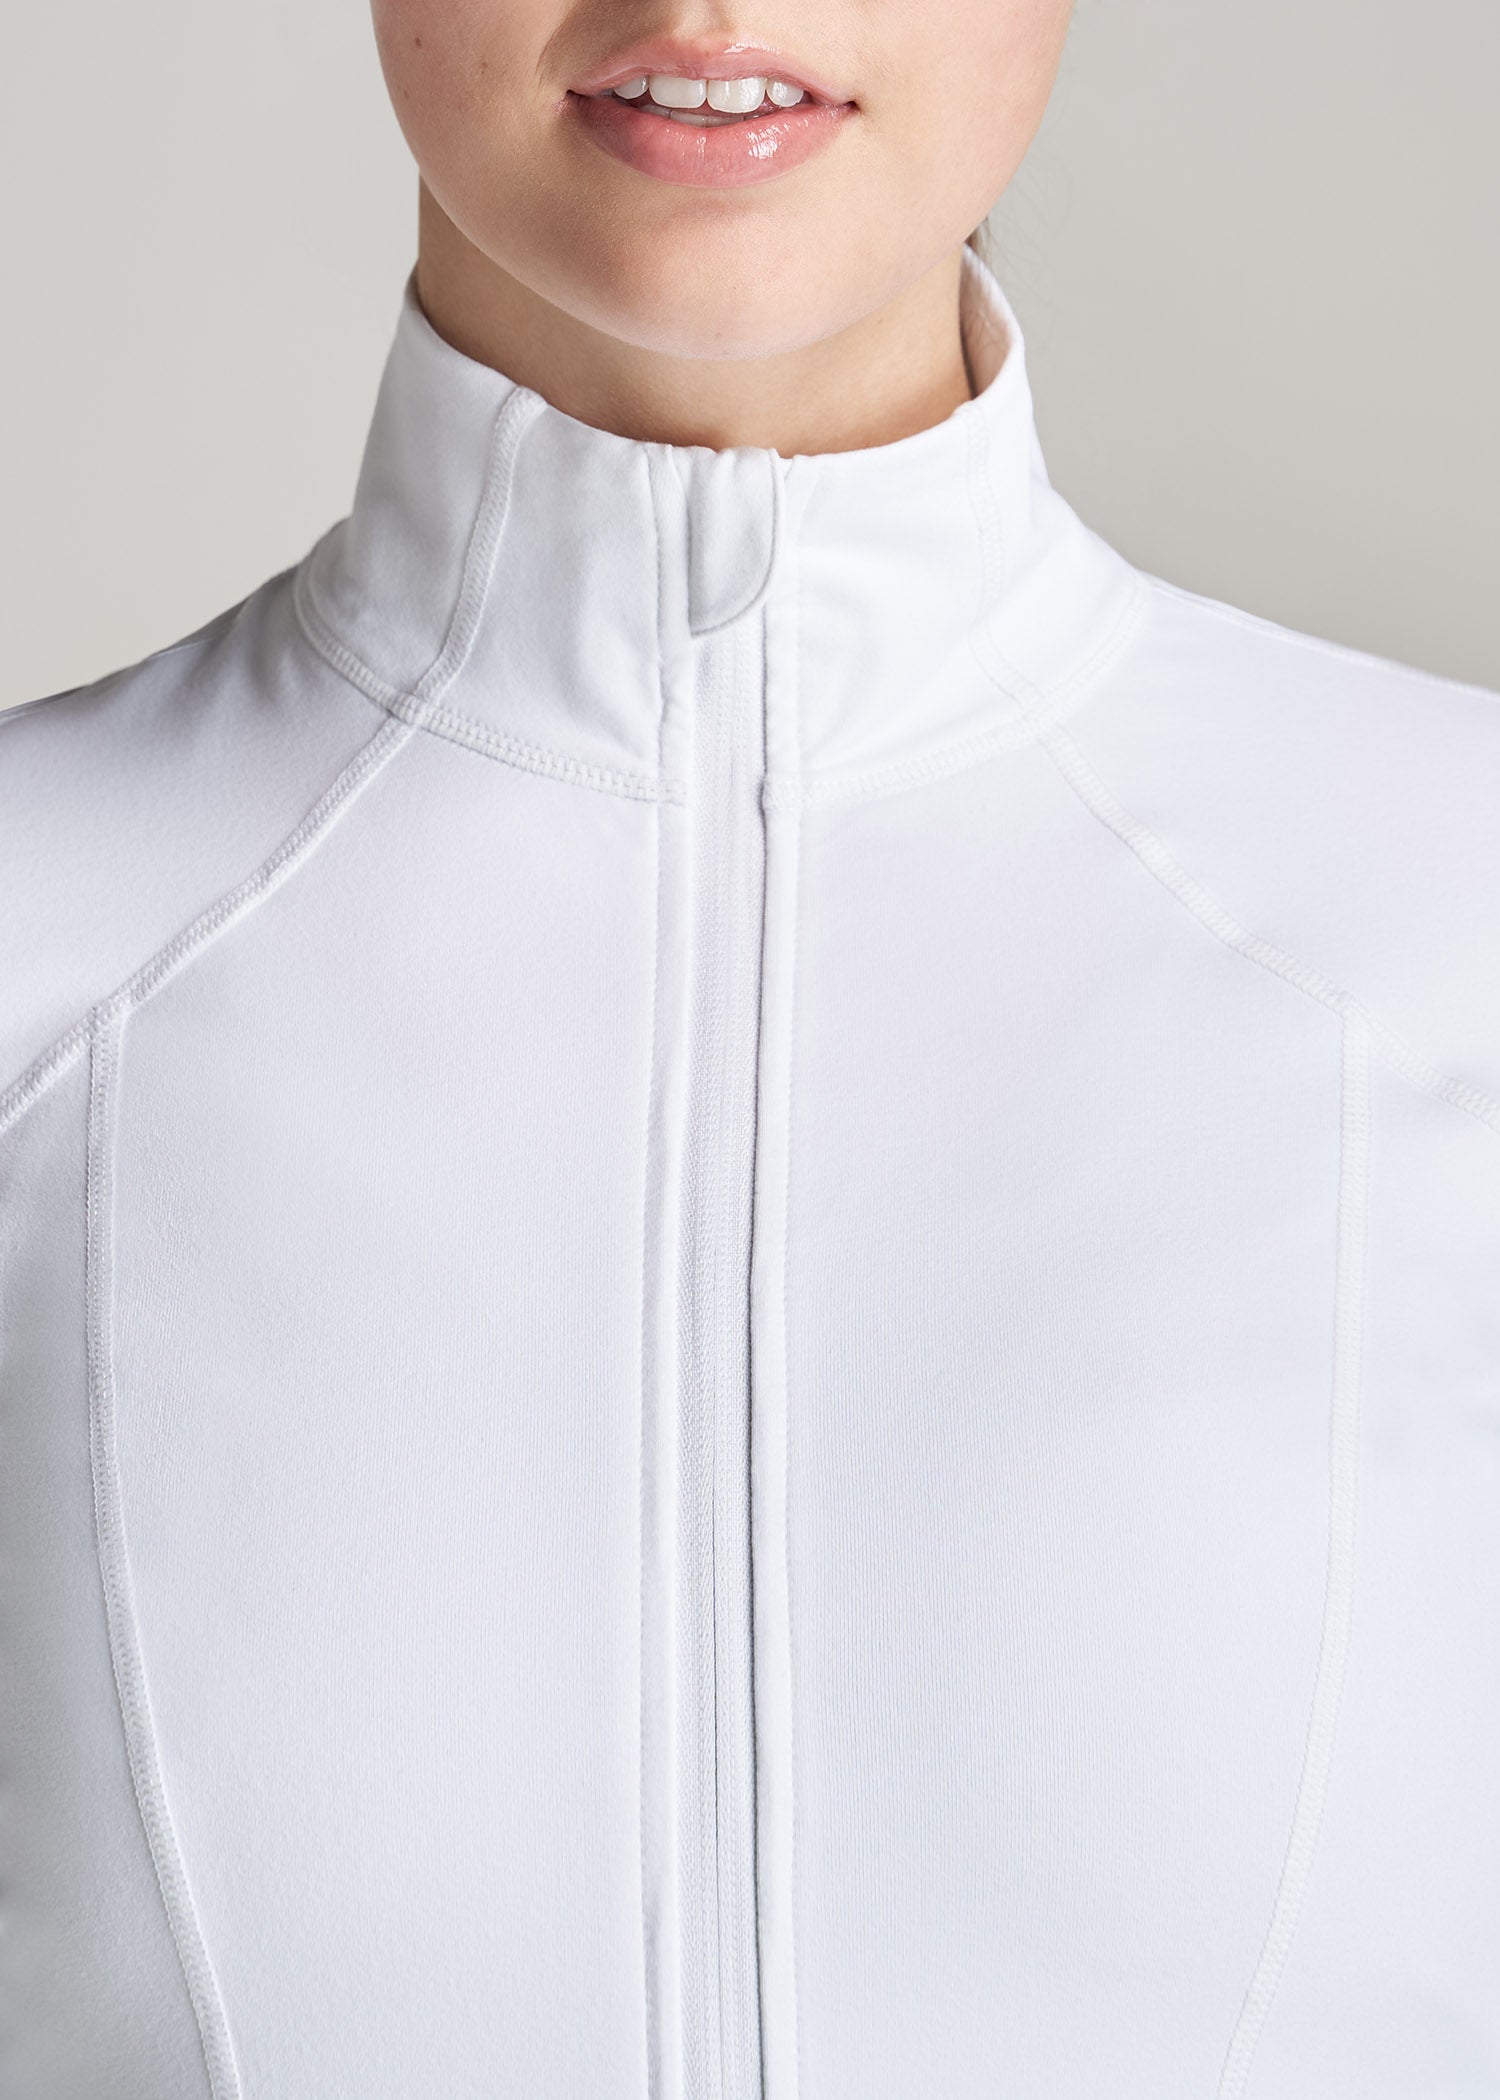 Women's Athletic Zip-Up Jacket in Bright White XL / Tall / Bright White